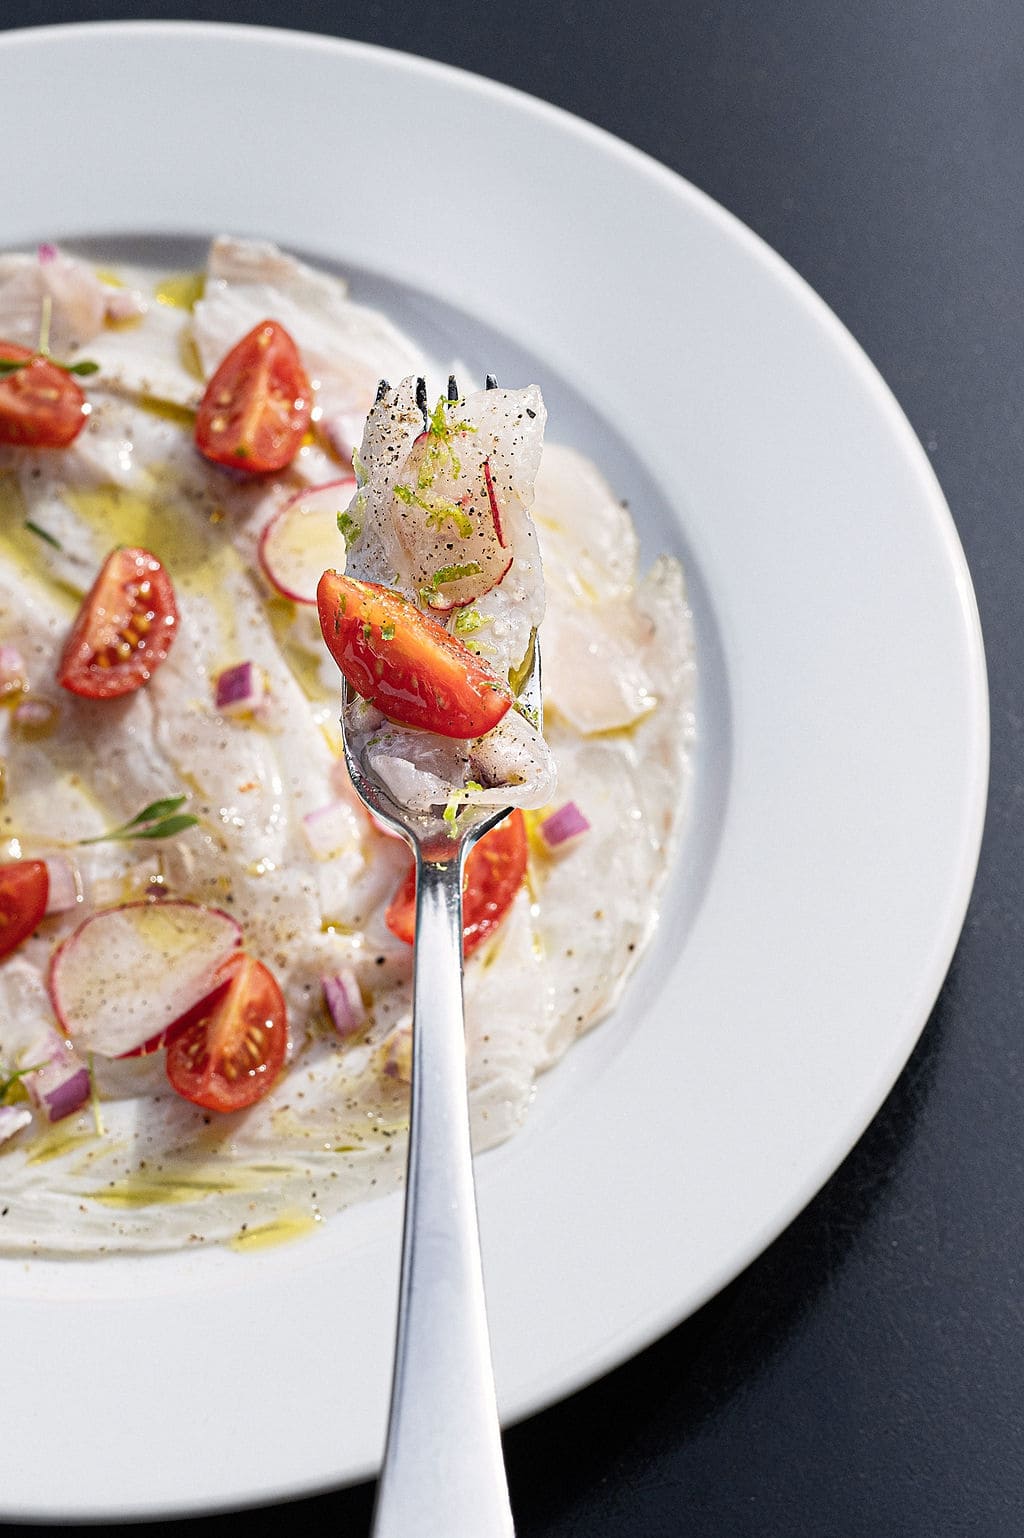 best brasserie restaurant paris 1, restaurant in the 1st arrondissement of Paris where you can enjoy typical French dishes such as this carpaccio.